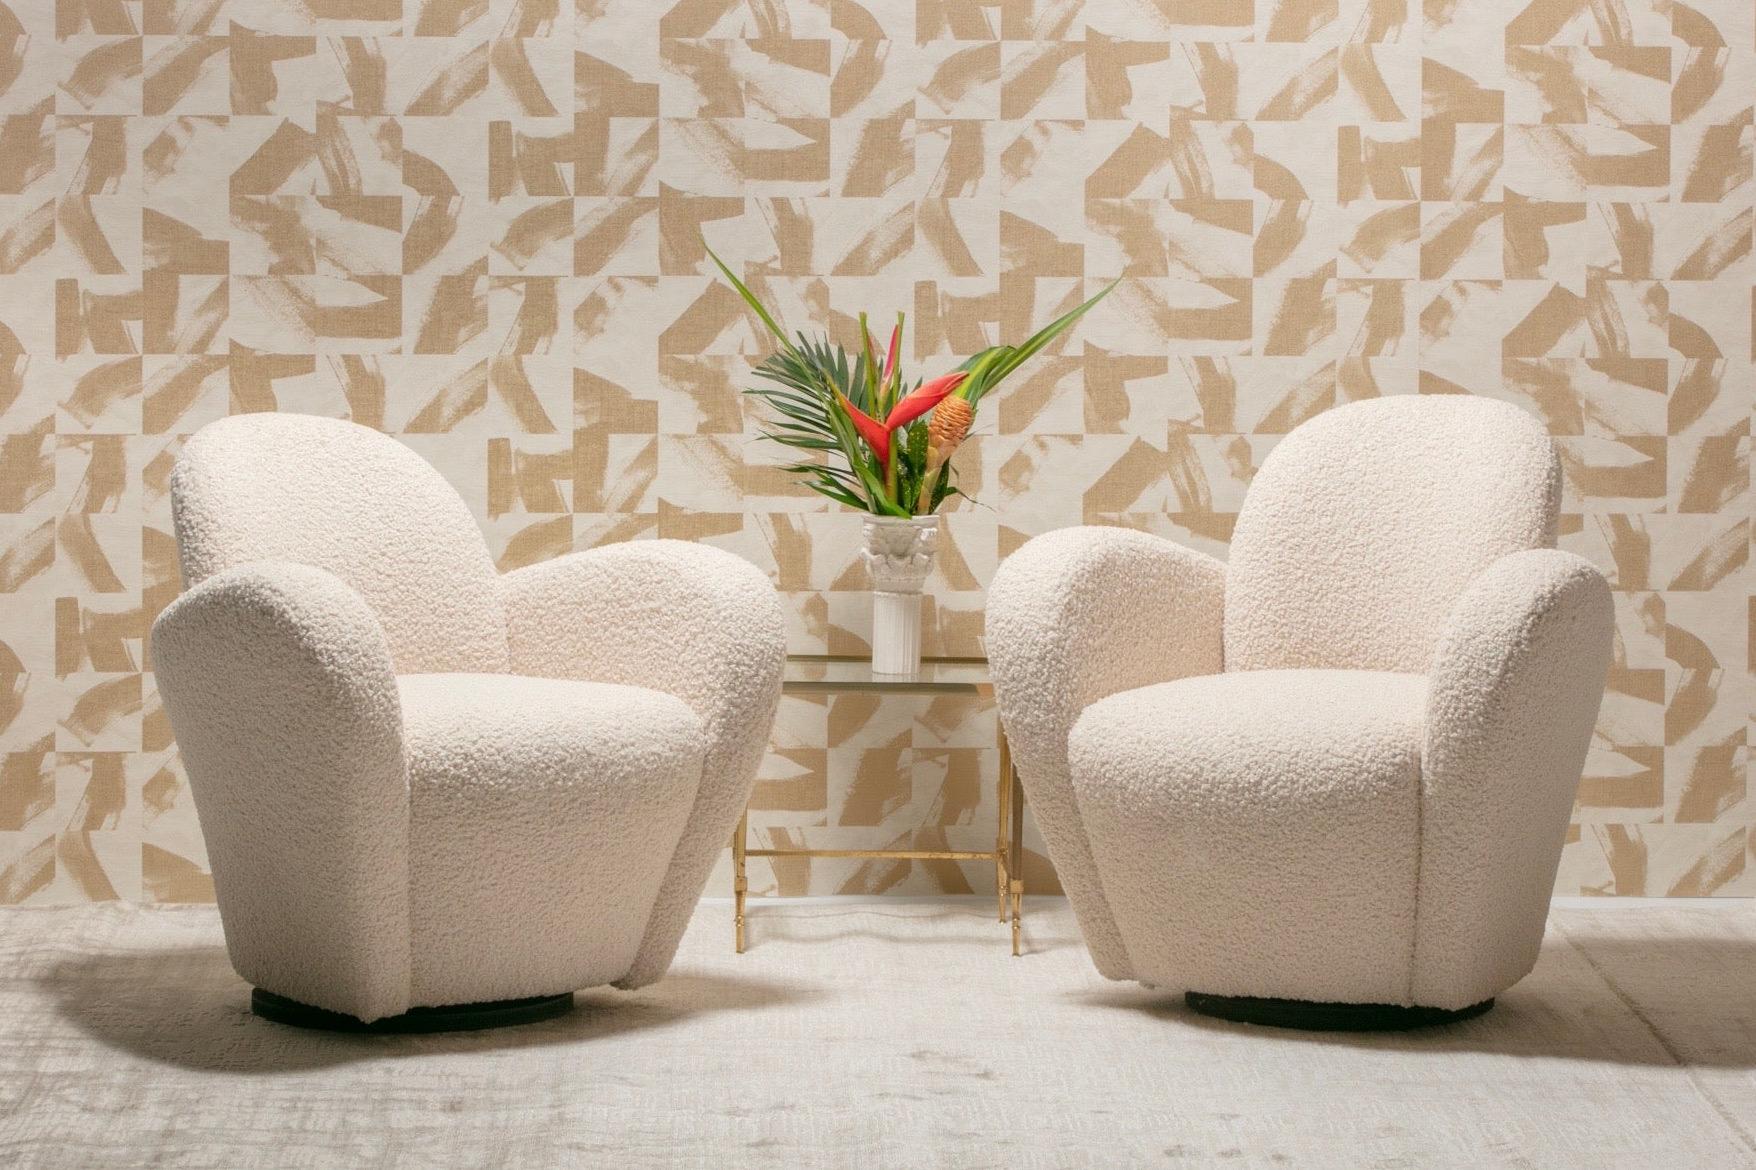 Sexy pair of Michael Wolk Miami chairs with swivel bases professionally reupholstered in luxurious ivory bouclé. Frequently mistaken as designed by Vladimir Kagan, these Michael Wolk Miami chairs are iconic and were most recently used by Kelly